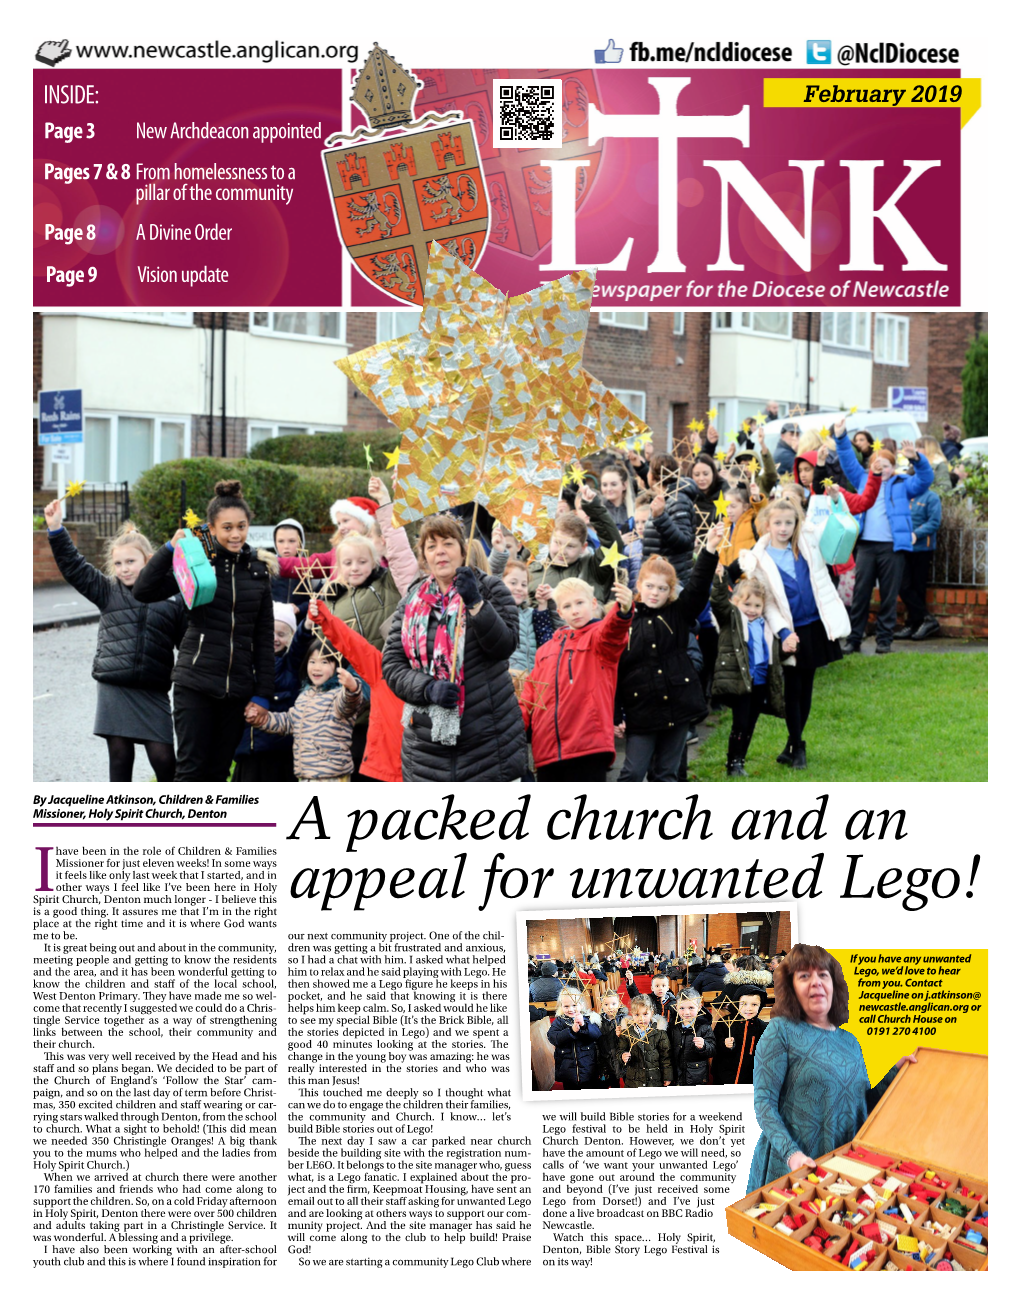 A Packed Church and an Appeal for Unwanted Lego!